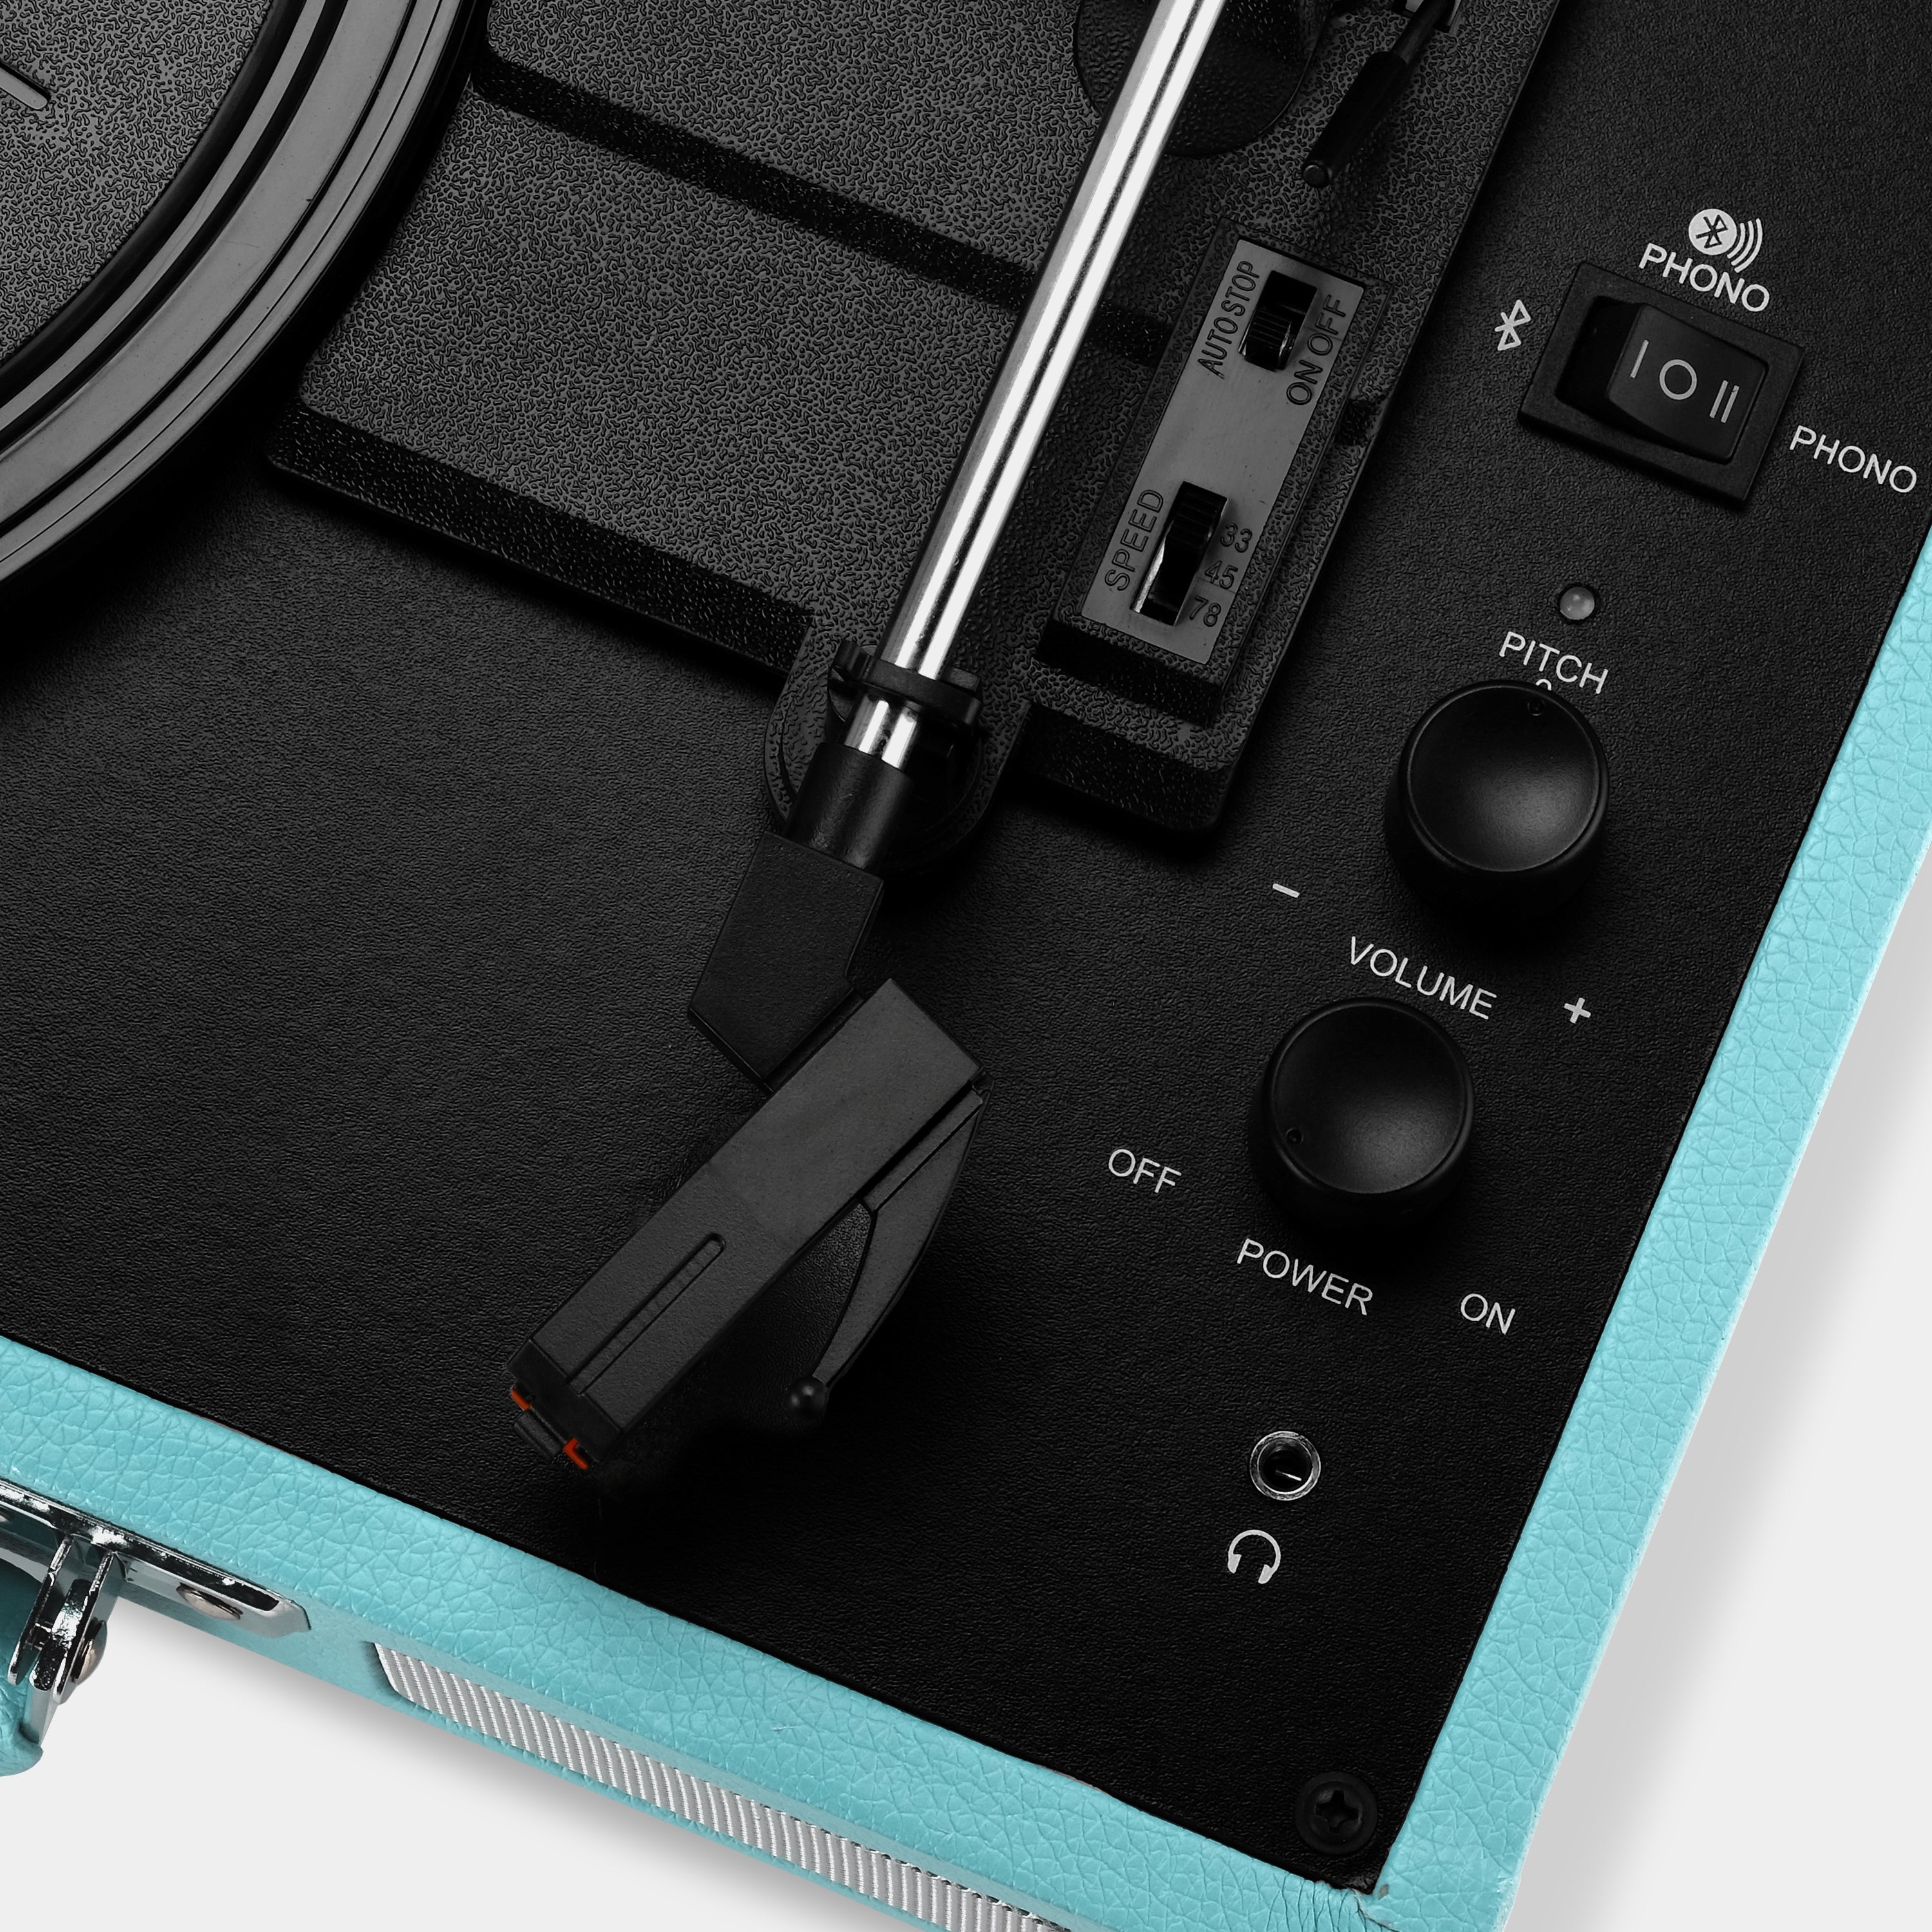 Crosley Cruiser Plus Turquoise Turntable with Bluetooth